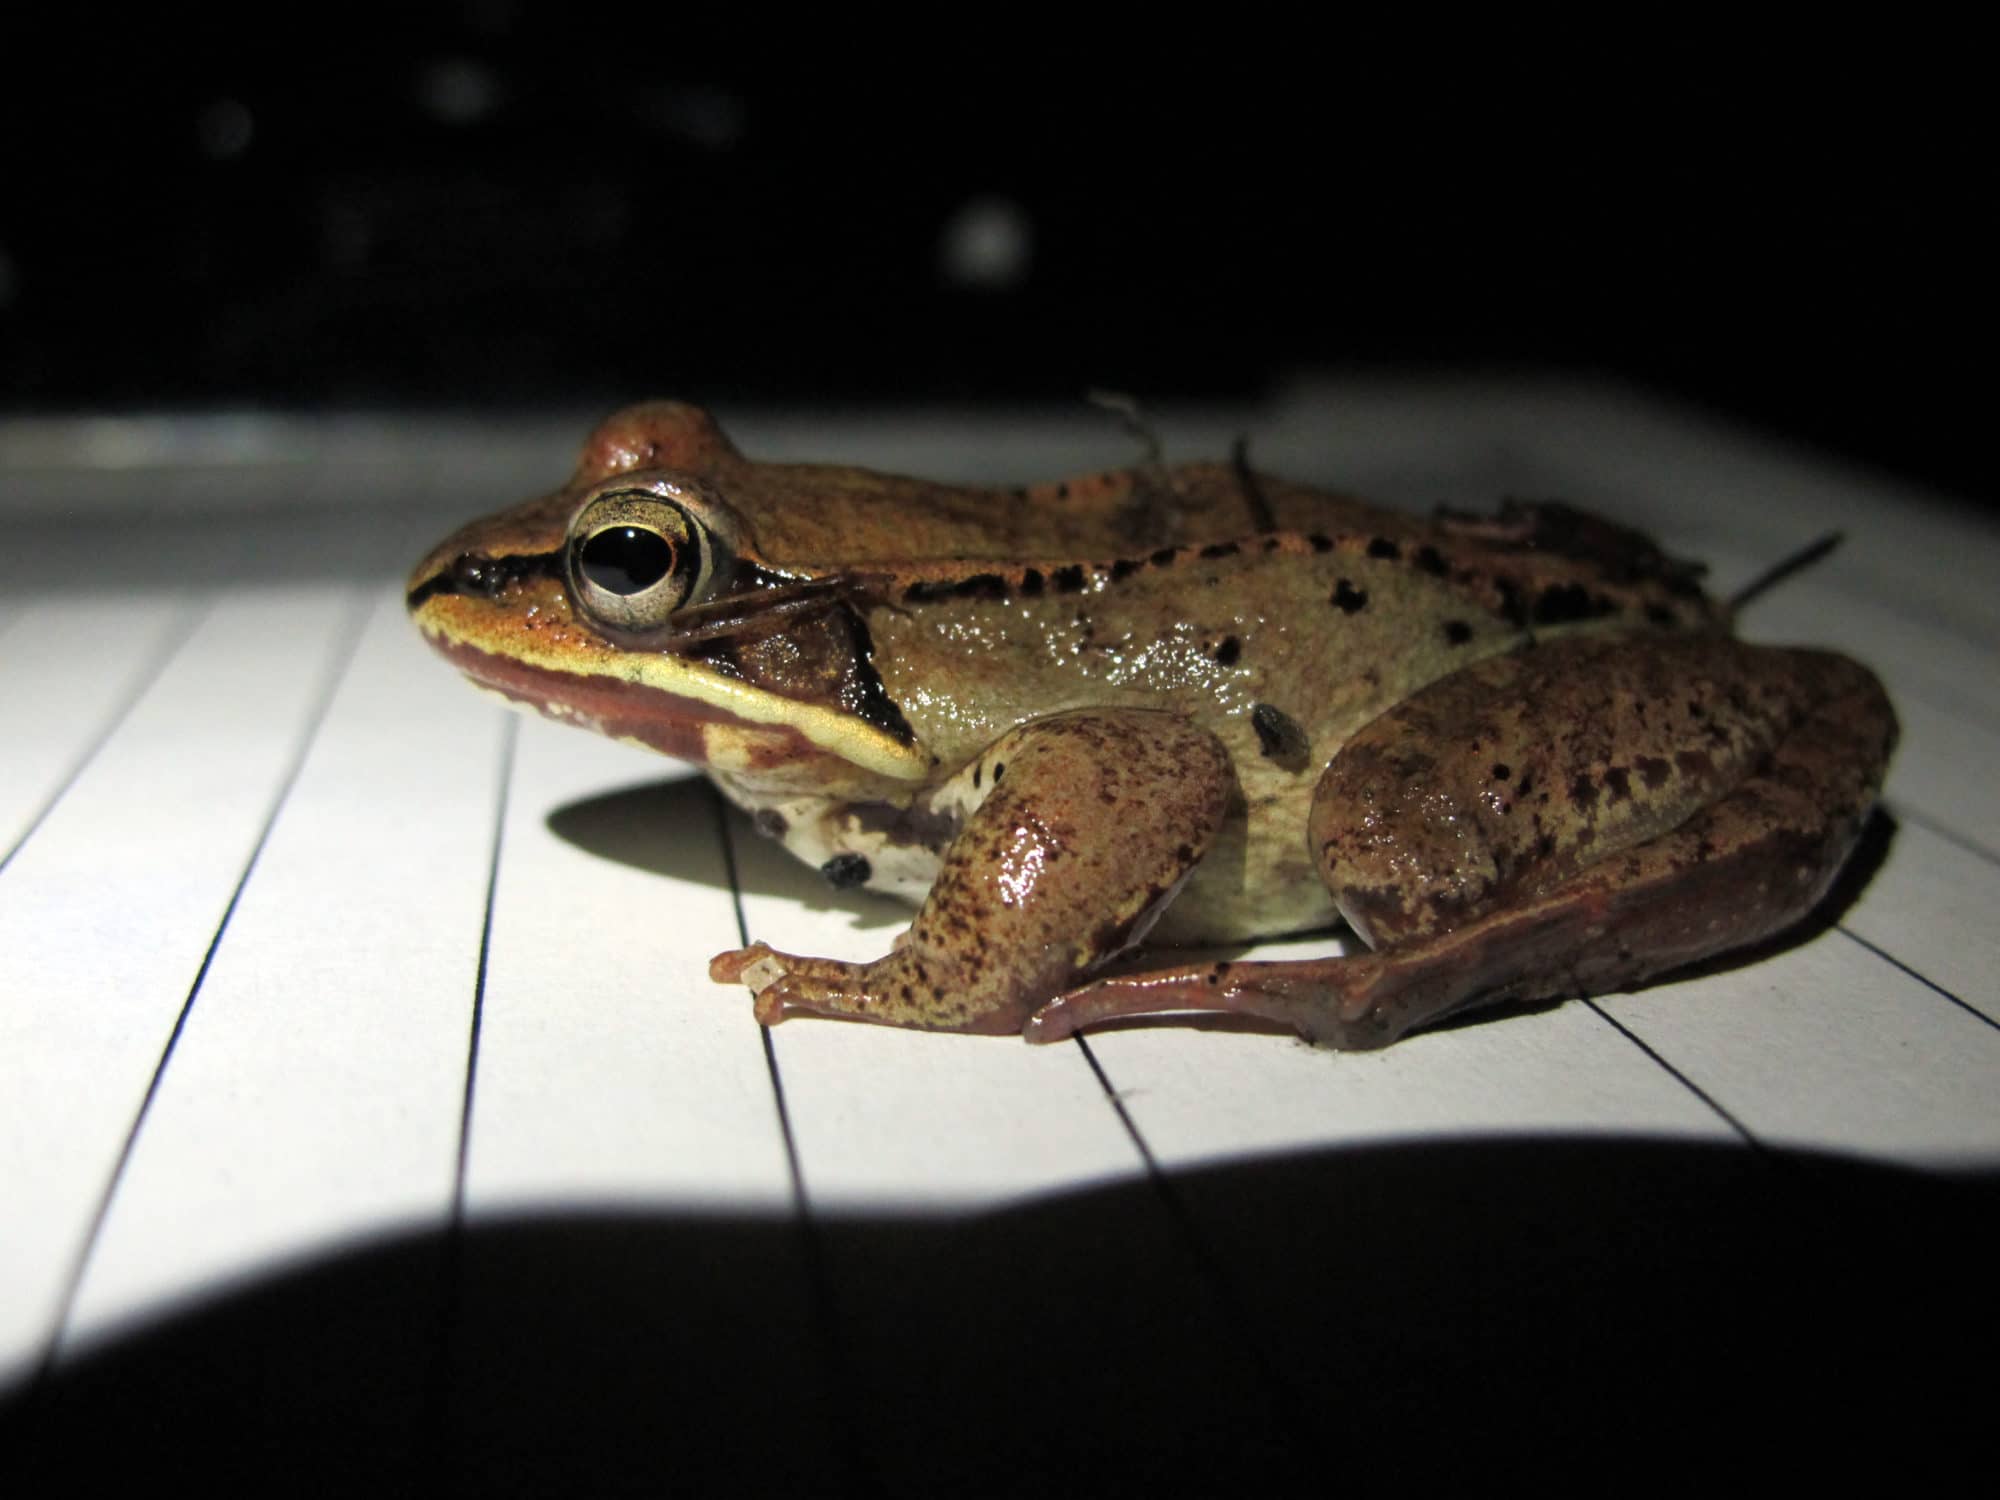 A wood frog pauses on a Big Night data form. (photo © Brett Amy Thelen)